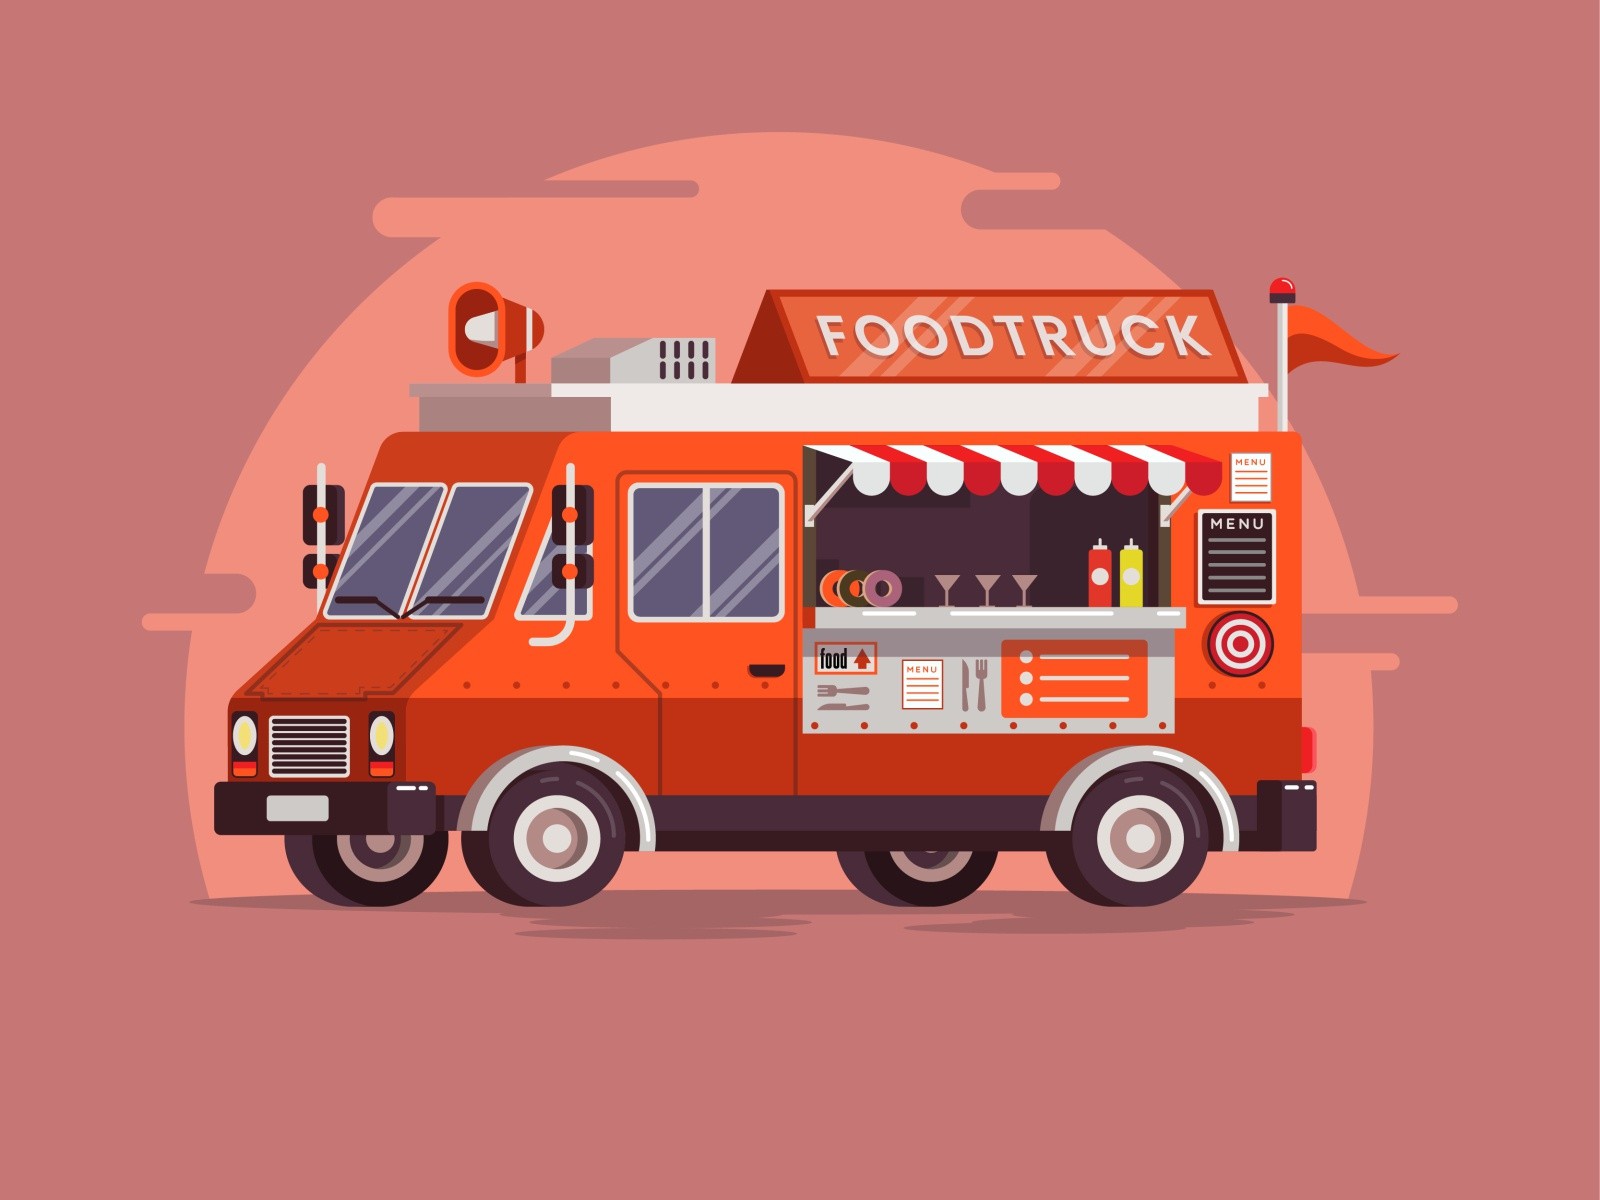 What do you need to start a food truck business? (5)